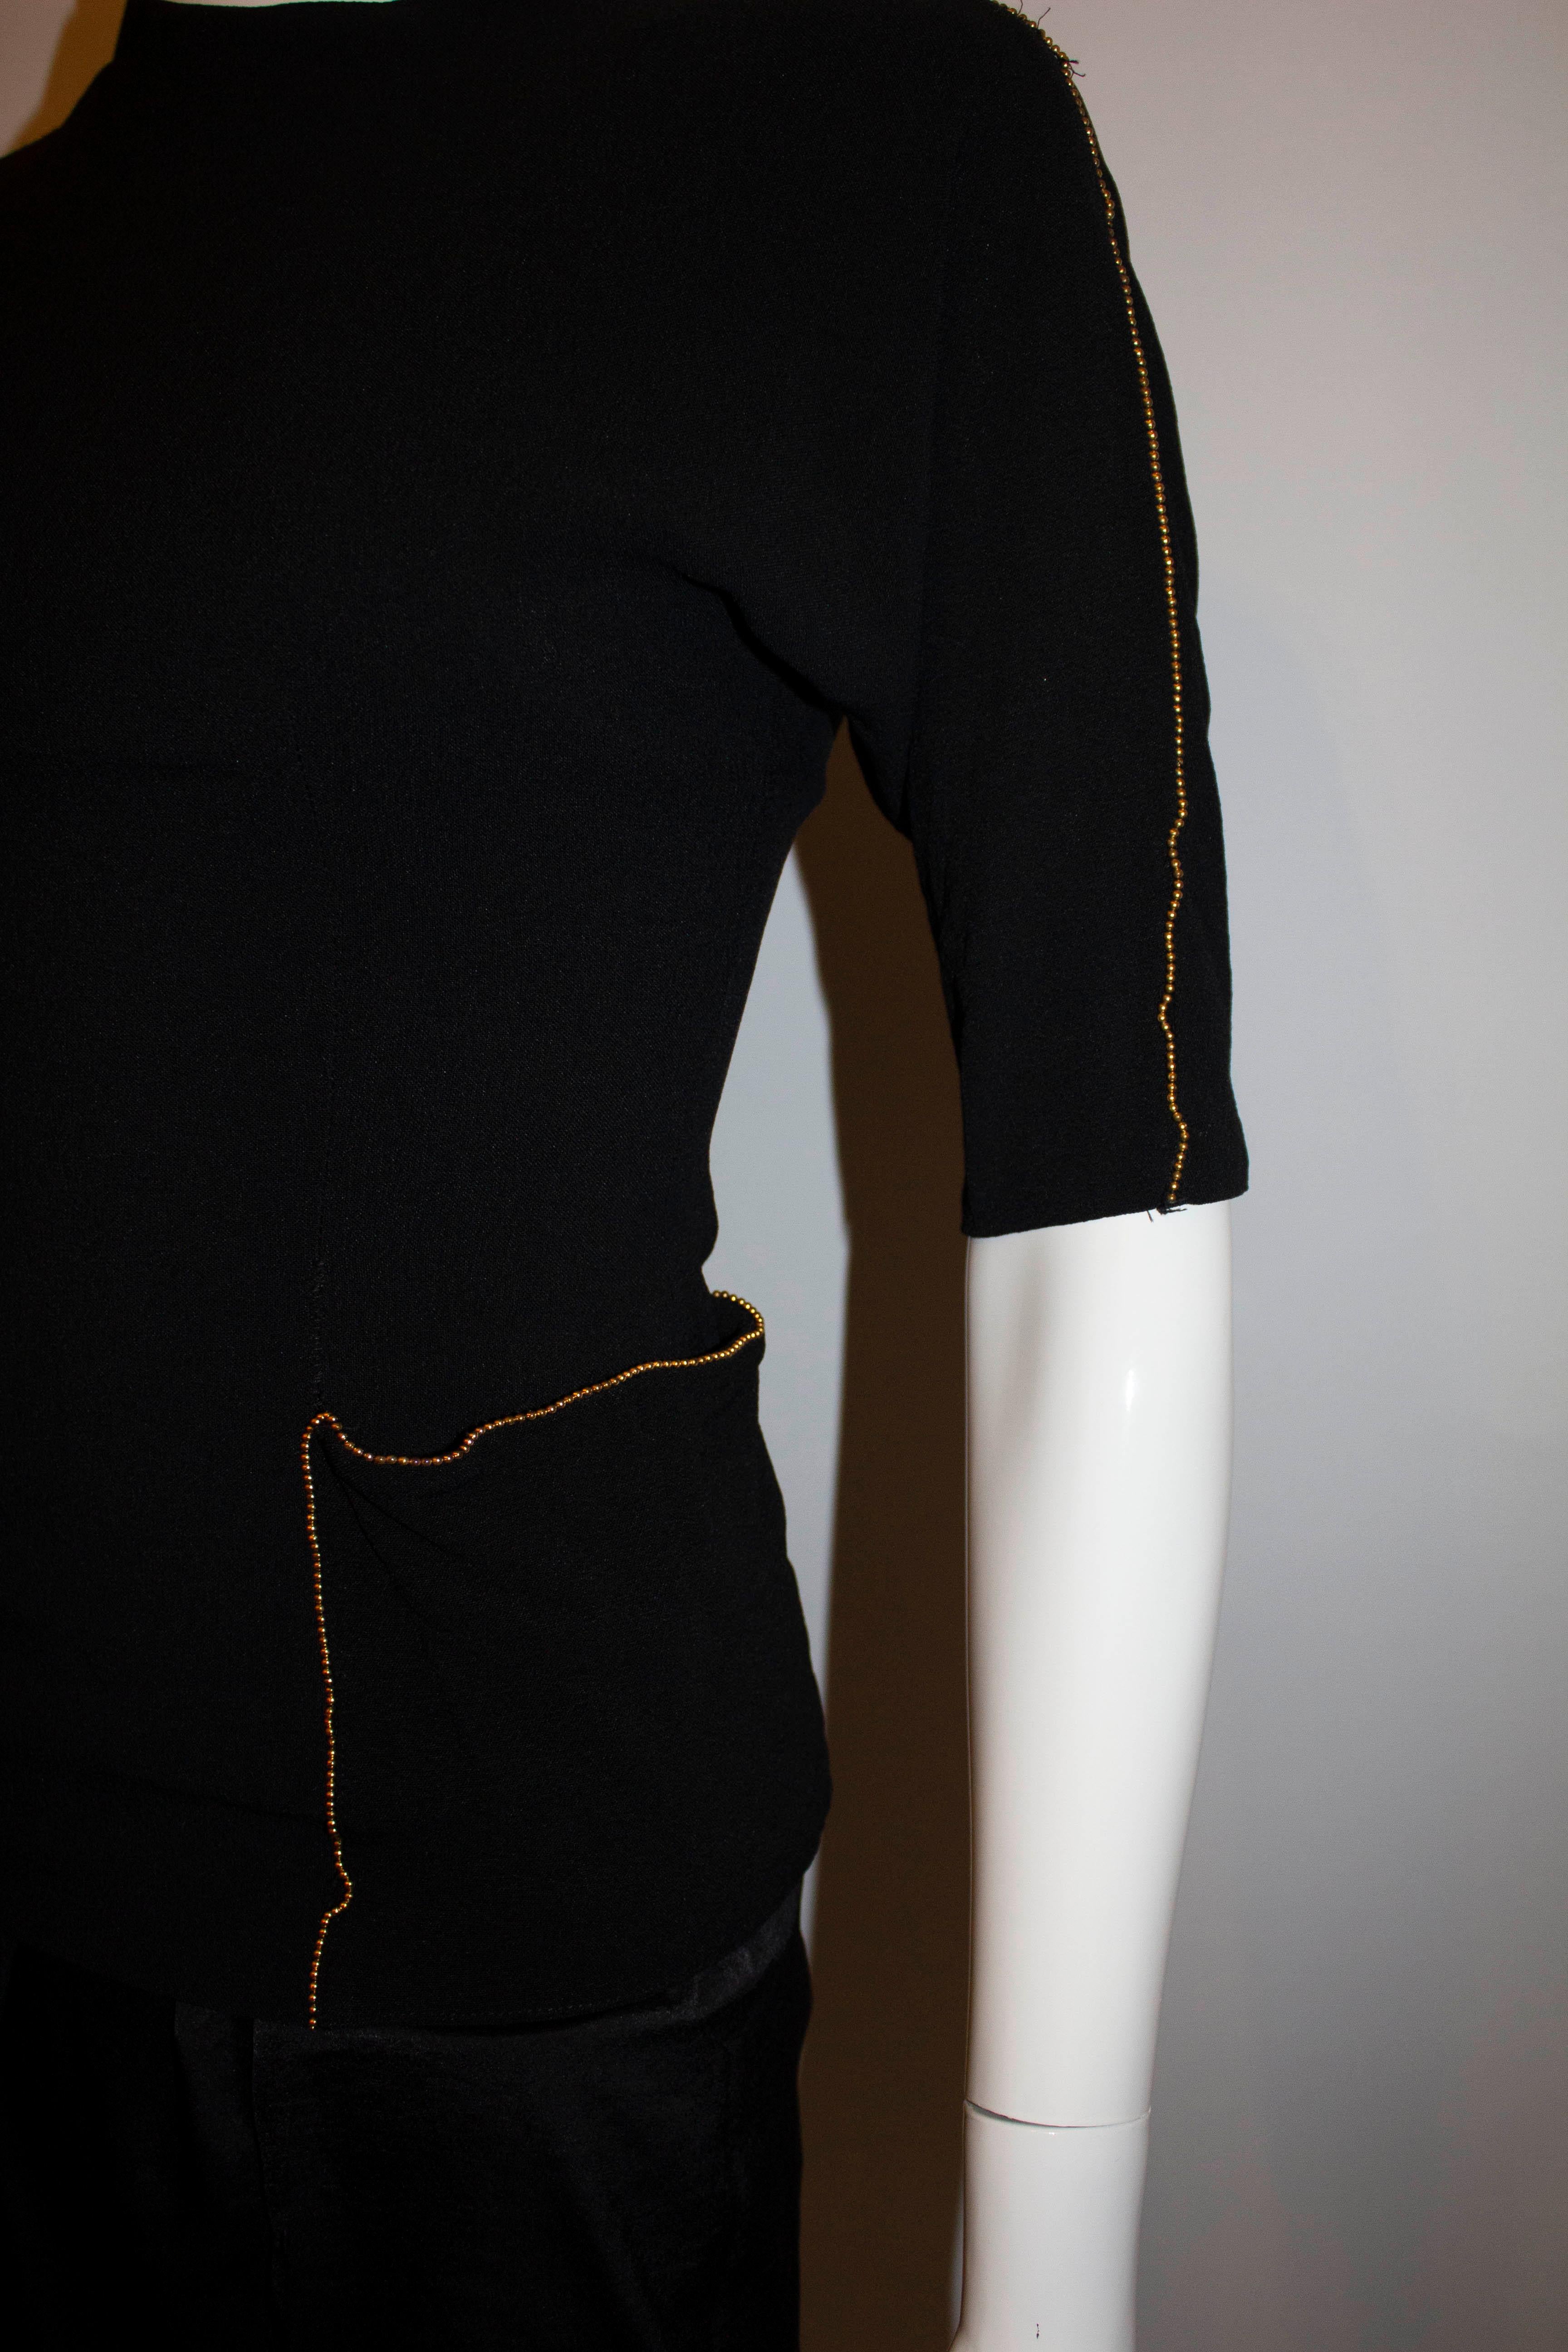 A chic vintage top in black crepe by Richey Jr.  The top has a back central zip with gold beading along the arms and on the pocket detail.  The two pockets have popper fastenings so they dont 'drop'.
Measurements : Bust 35'', length 23''